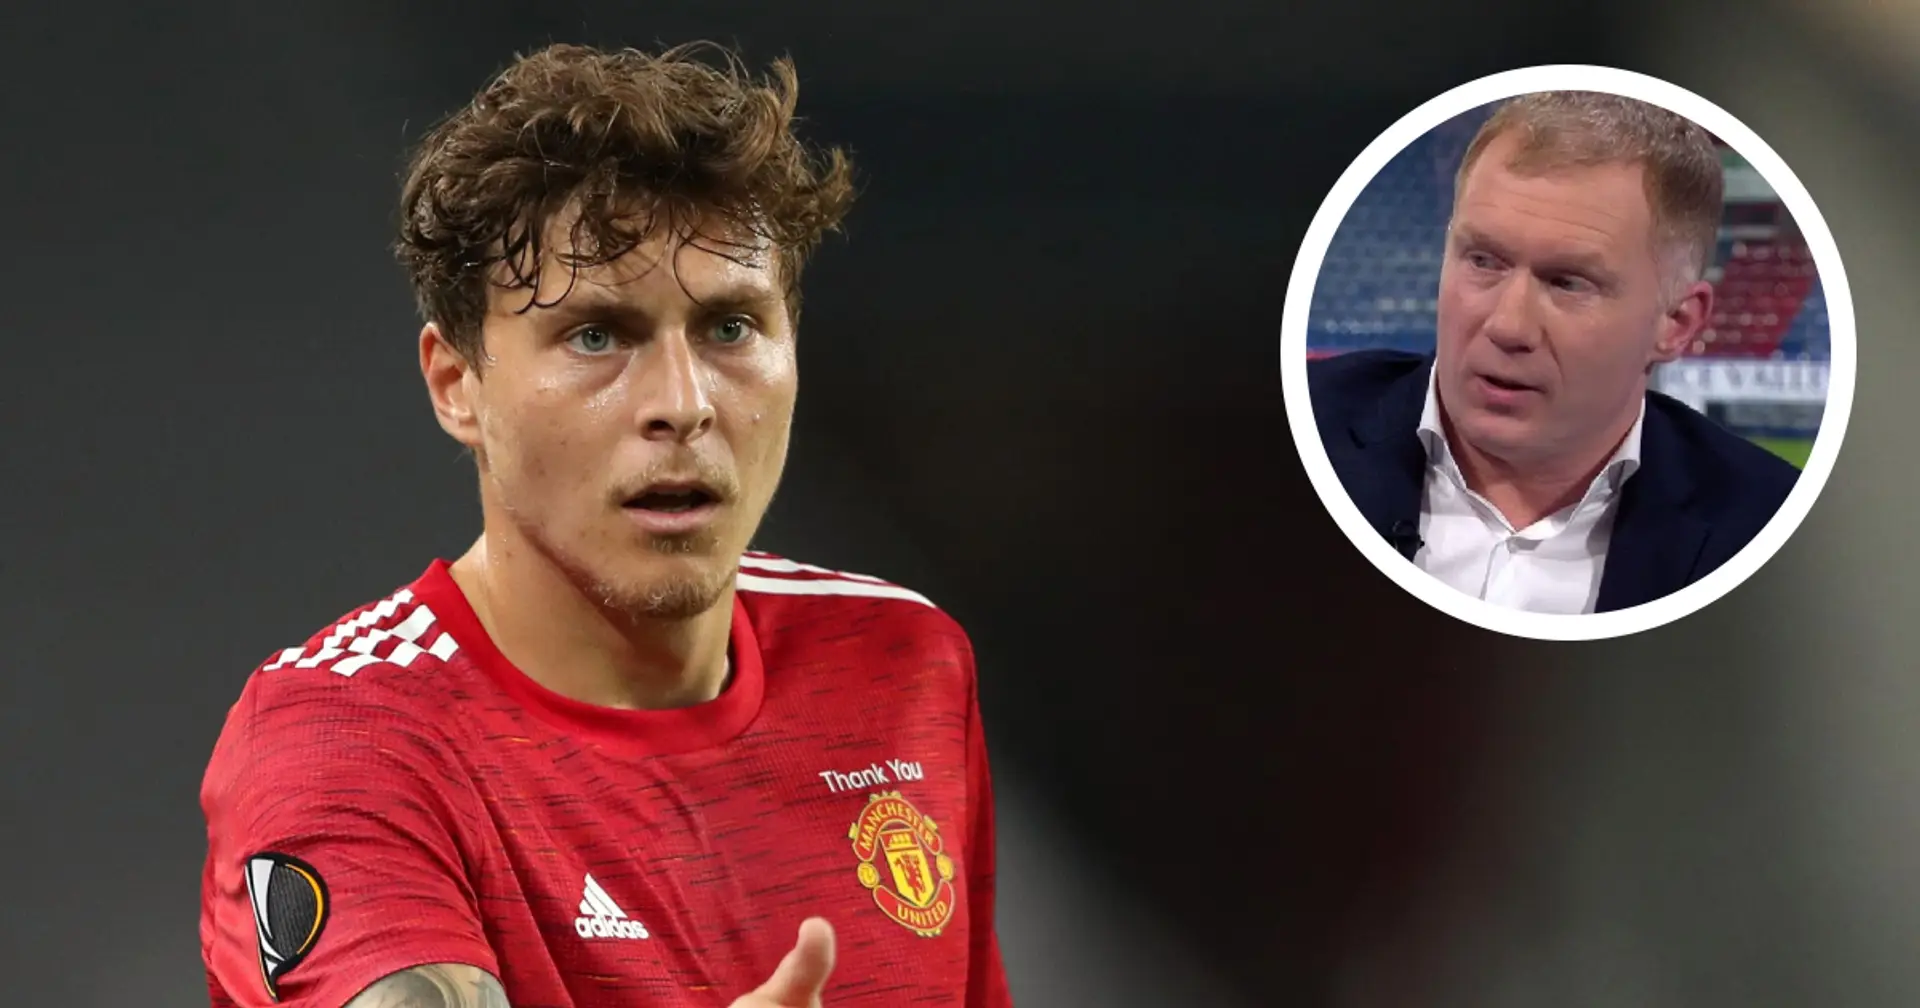 'I hope we don’t see it again': Paul Scholes not pleased with Victor Lindelof's performance in Leicester draw 